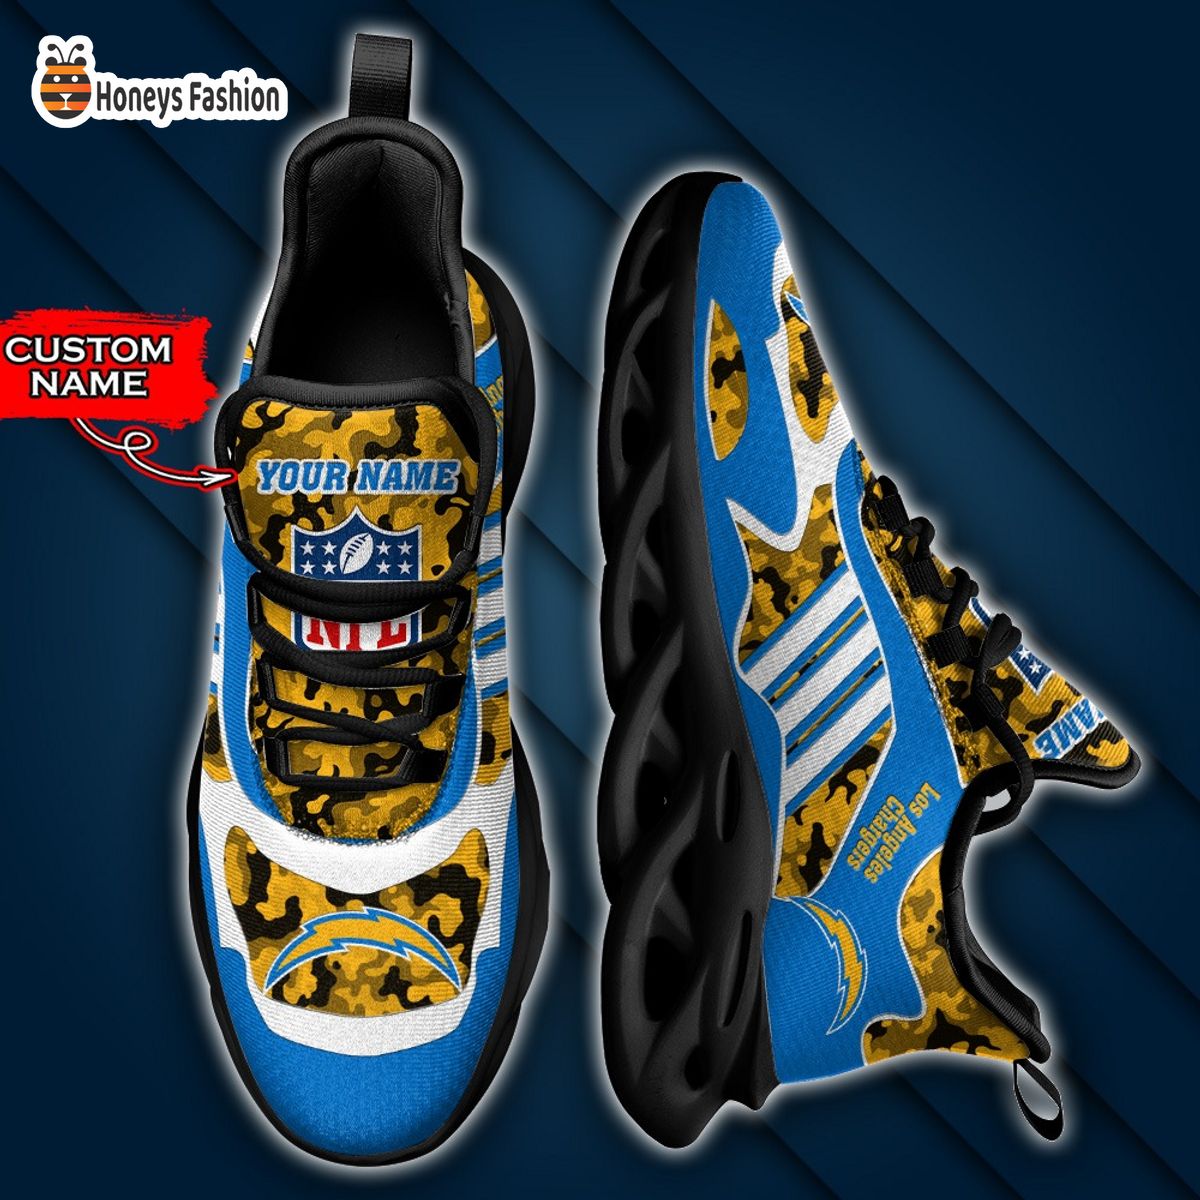 Los Angeles Chargers NFL Adidas Personalized Max Soul Shoes